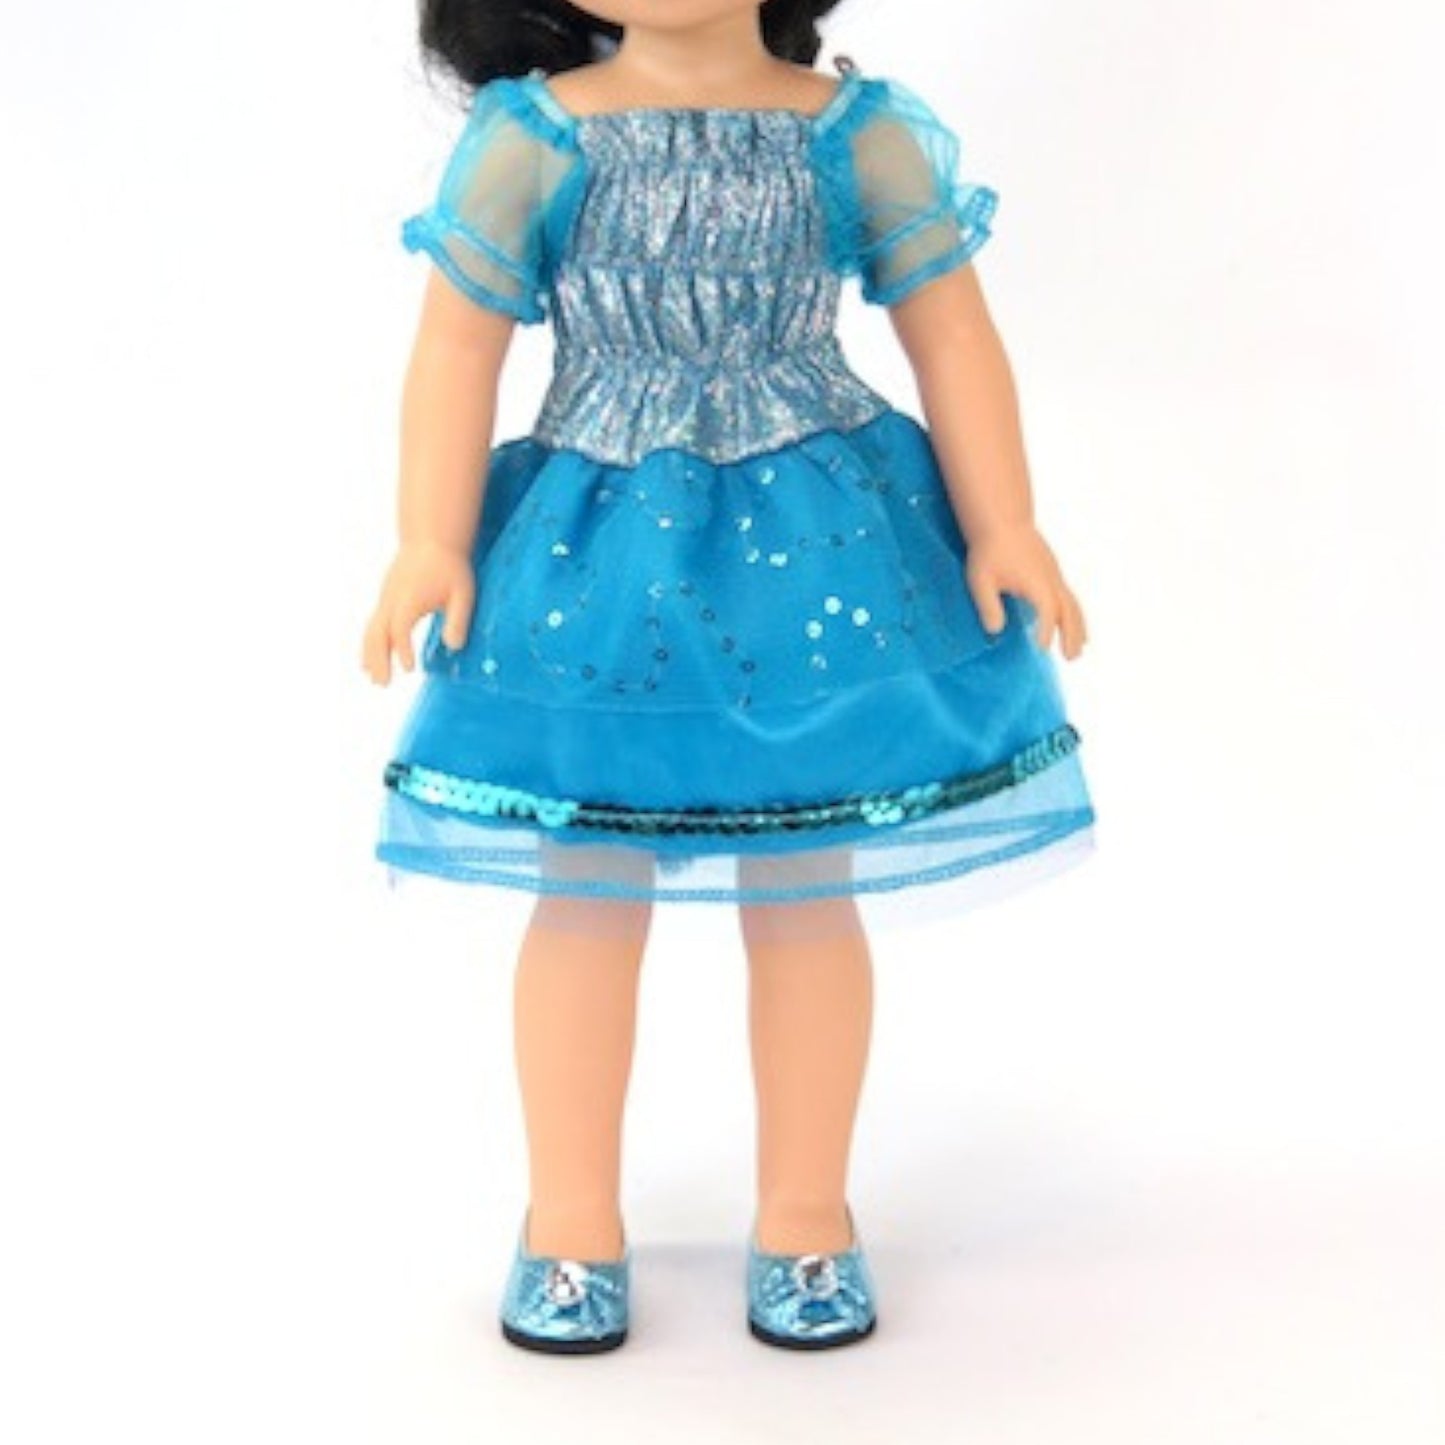 Little Blue Sparkly Dress for 14 1/2-inch dolls with doll